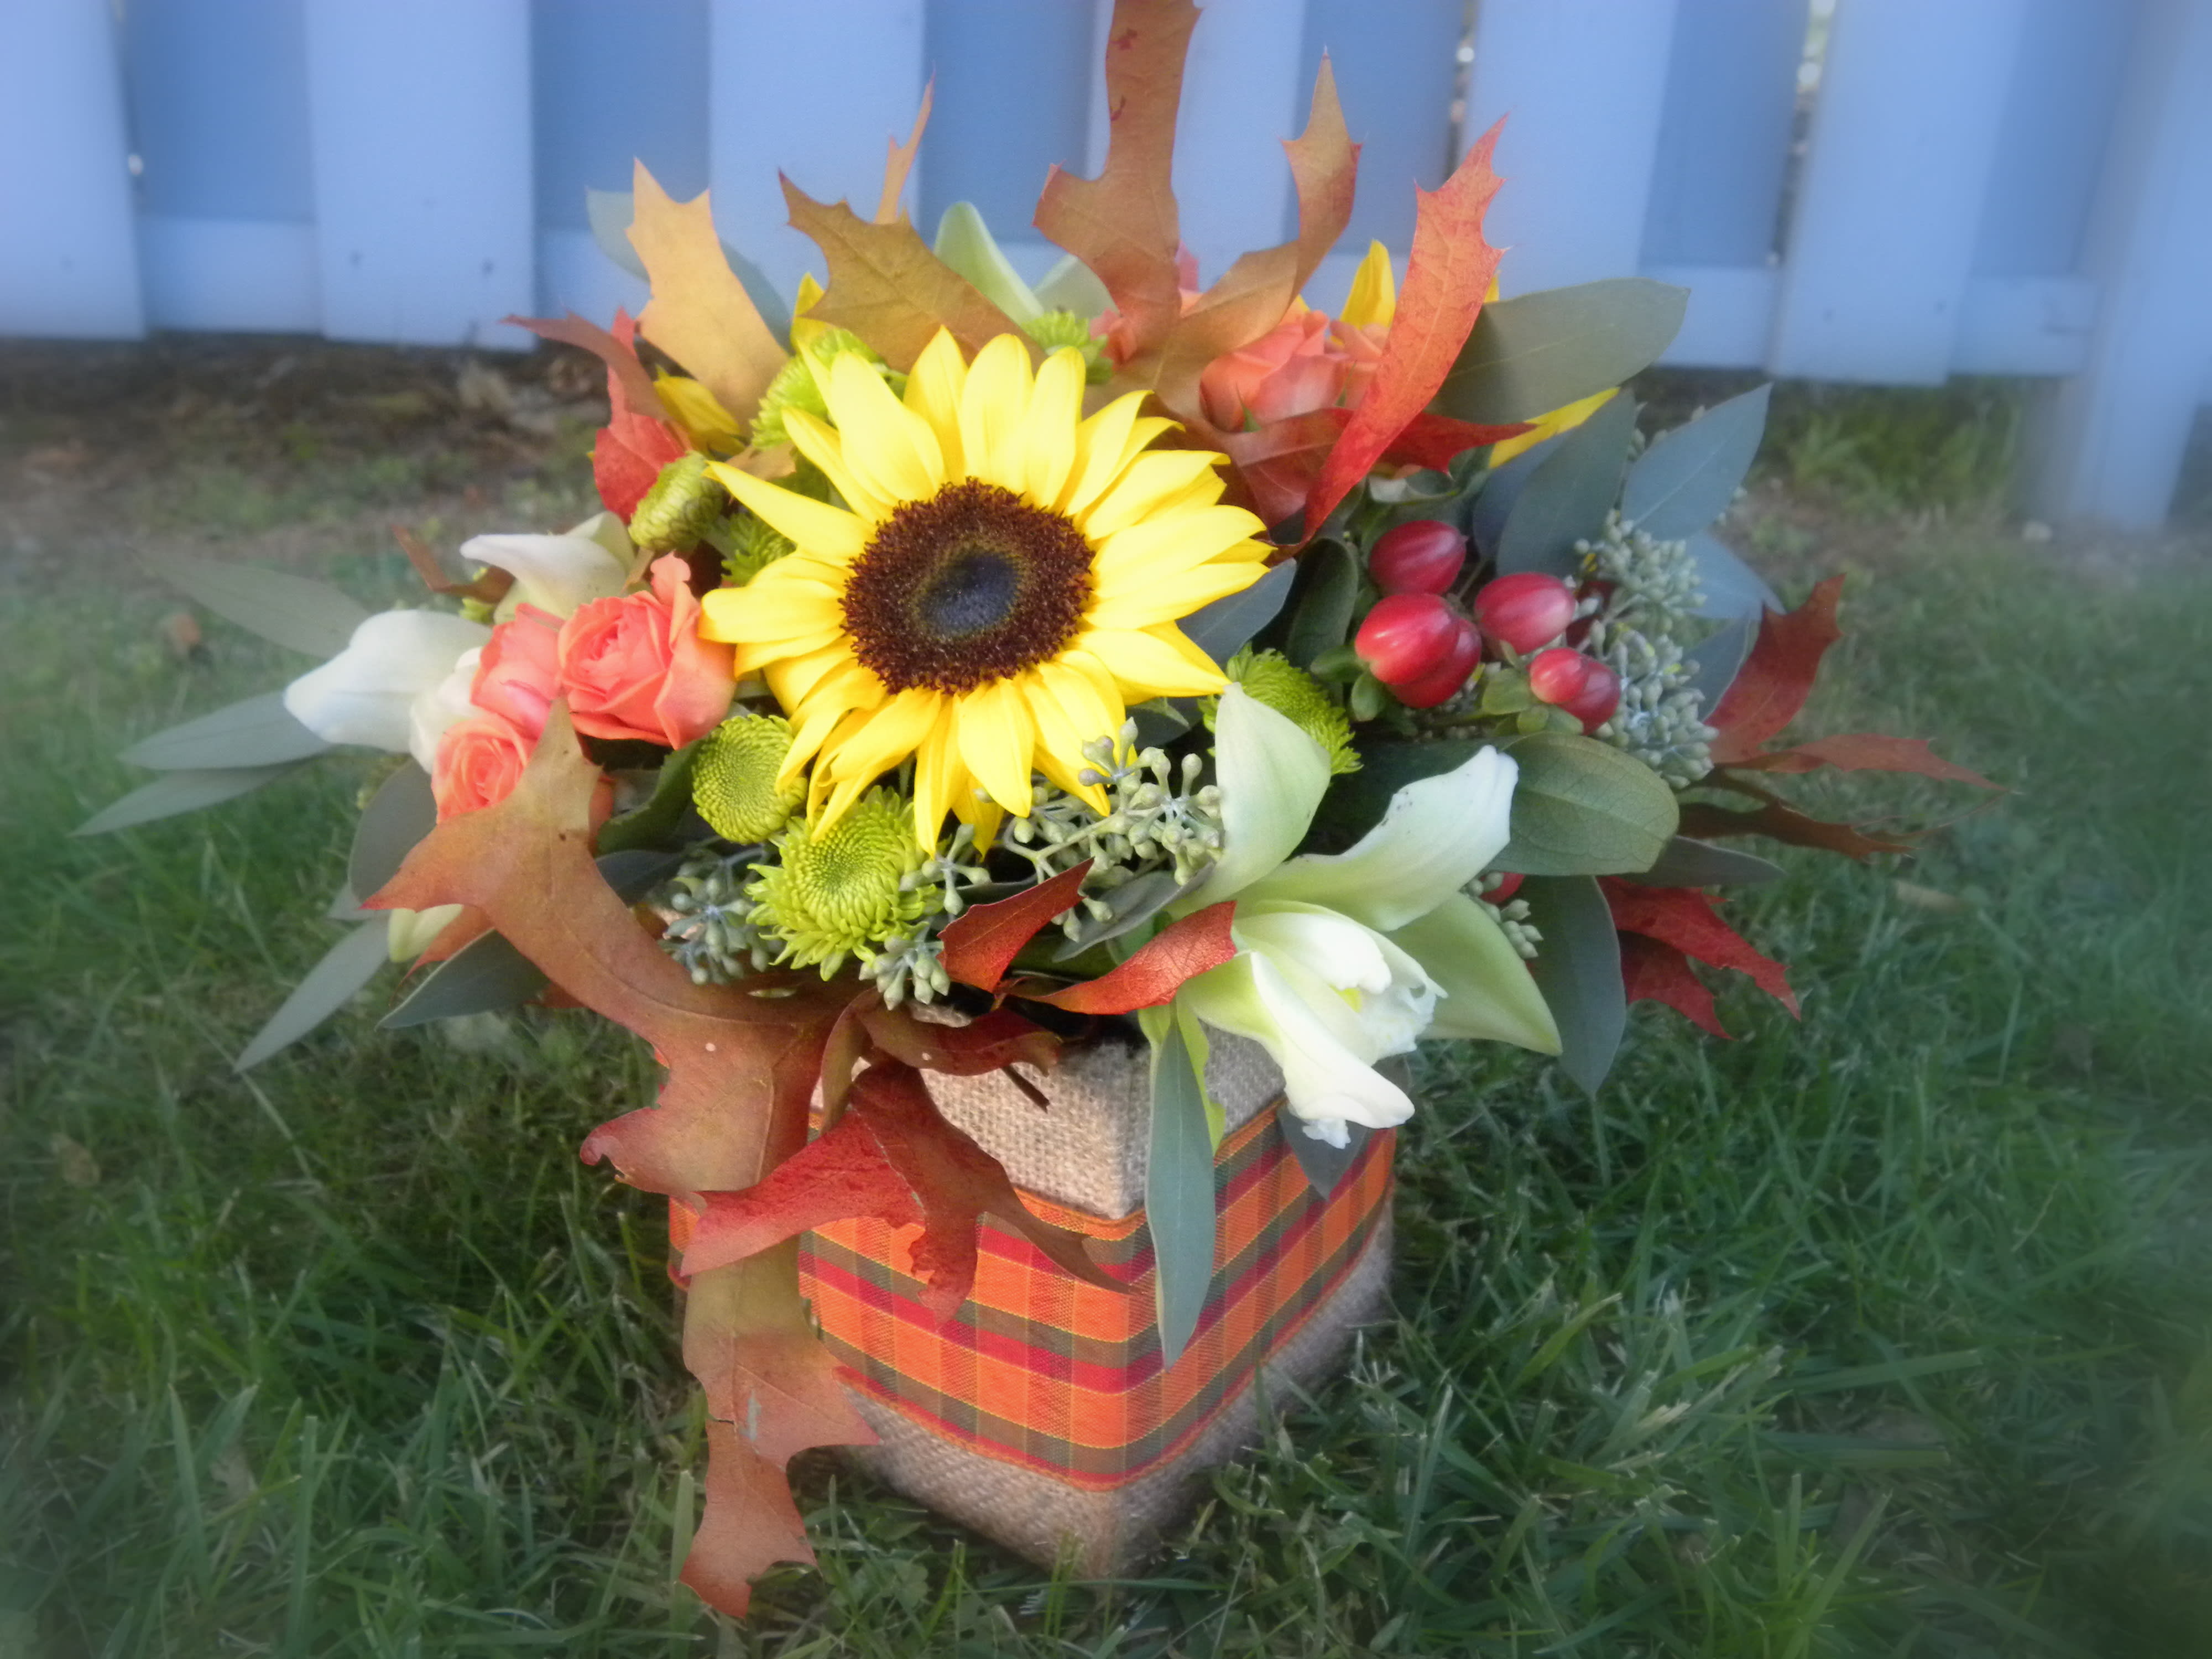 Box of Autum - Beautiful arrangement of sunflowers, spray roses, cymbidium orchids, green buttons, red hypericum berries, seeded eucalyptus and oak leaves 